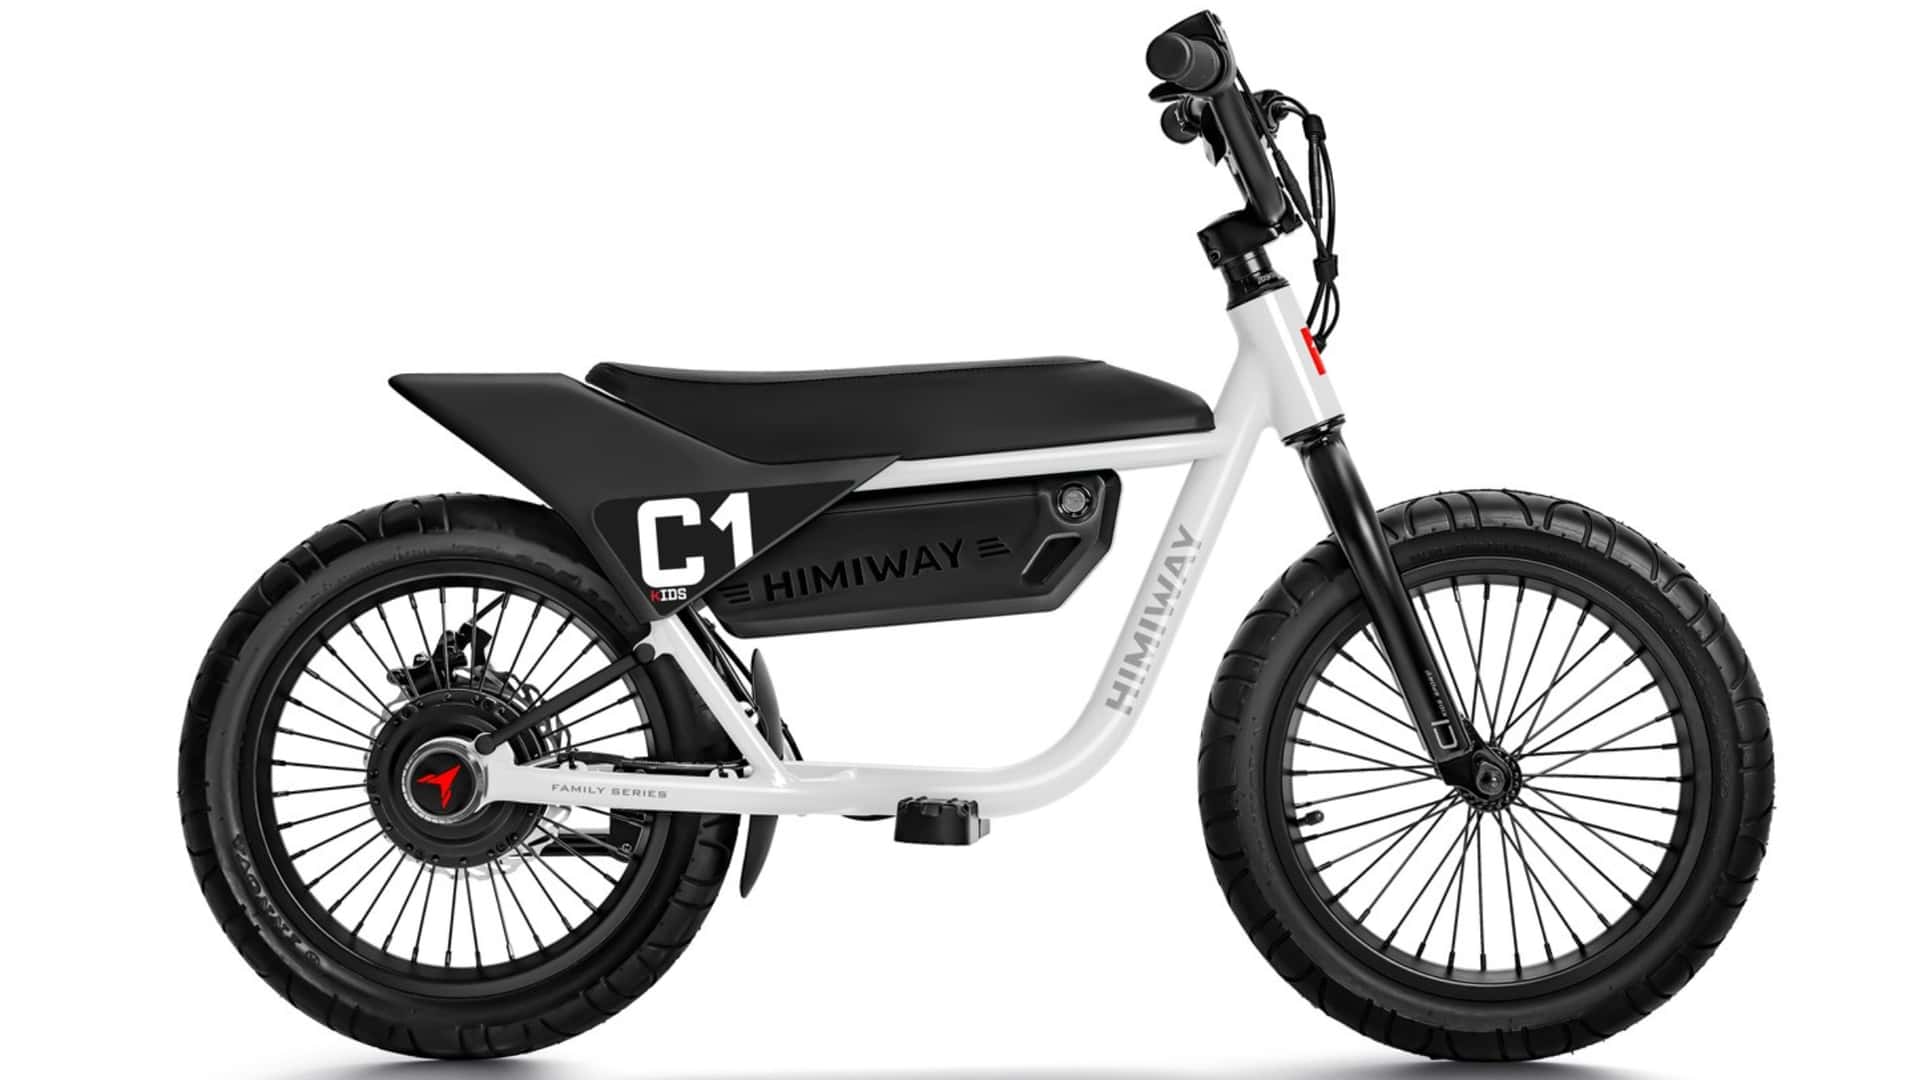 check out himiway’s new c1 electric bike made for kids